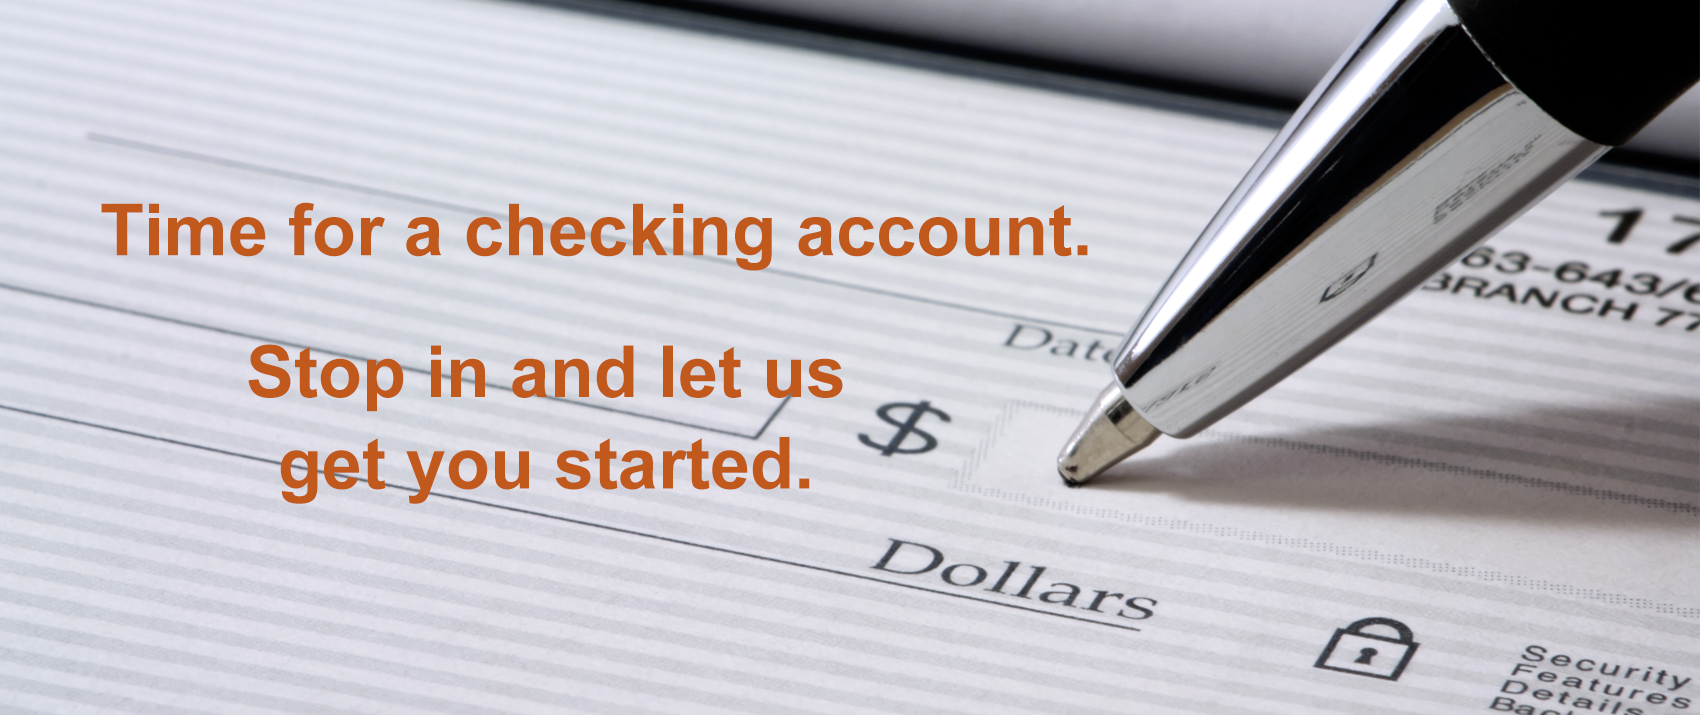 Time for a checking account. Stop in and let us get you started.